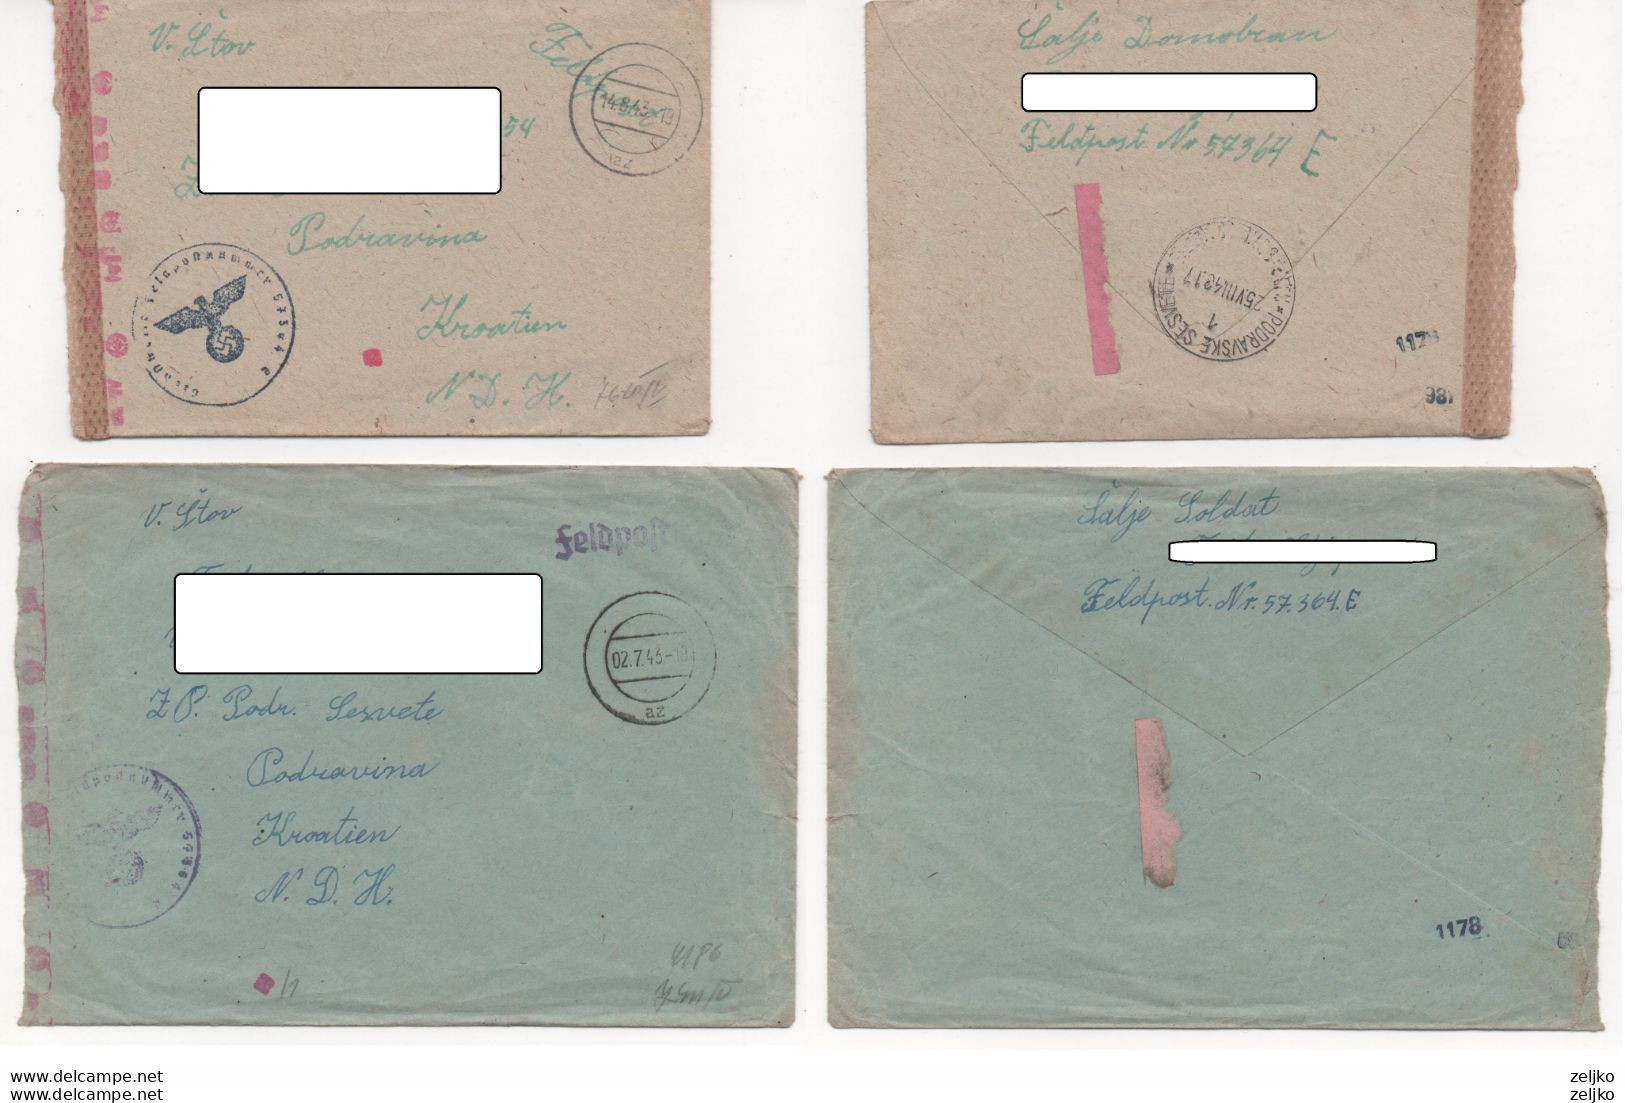 Croatia NDH, Germany, WWII, soldier's letters included, 369th (Croatian) Infantry Division, vražja, 15 letters and cards